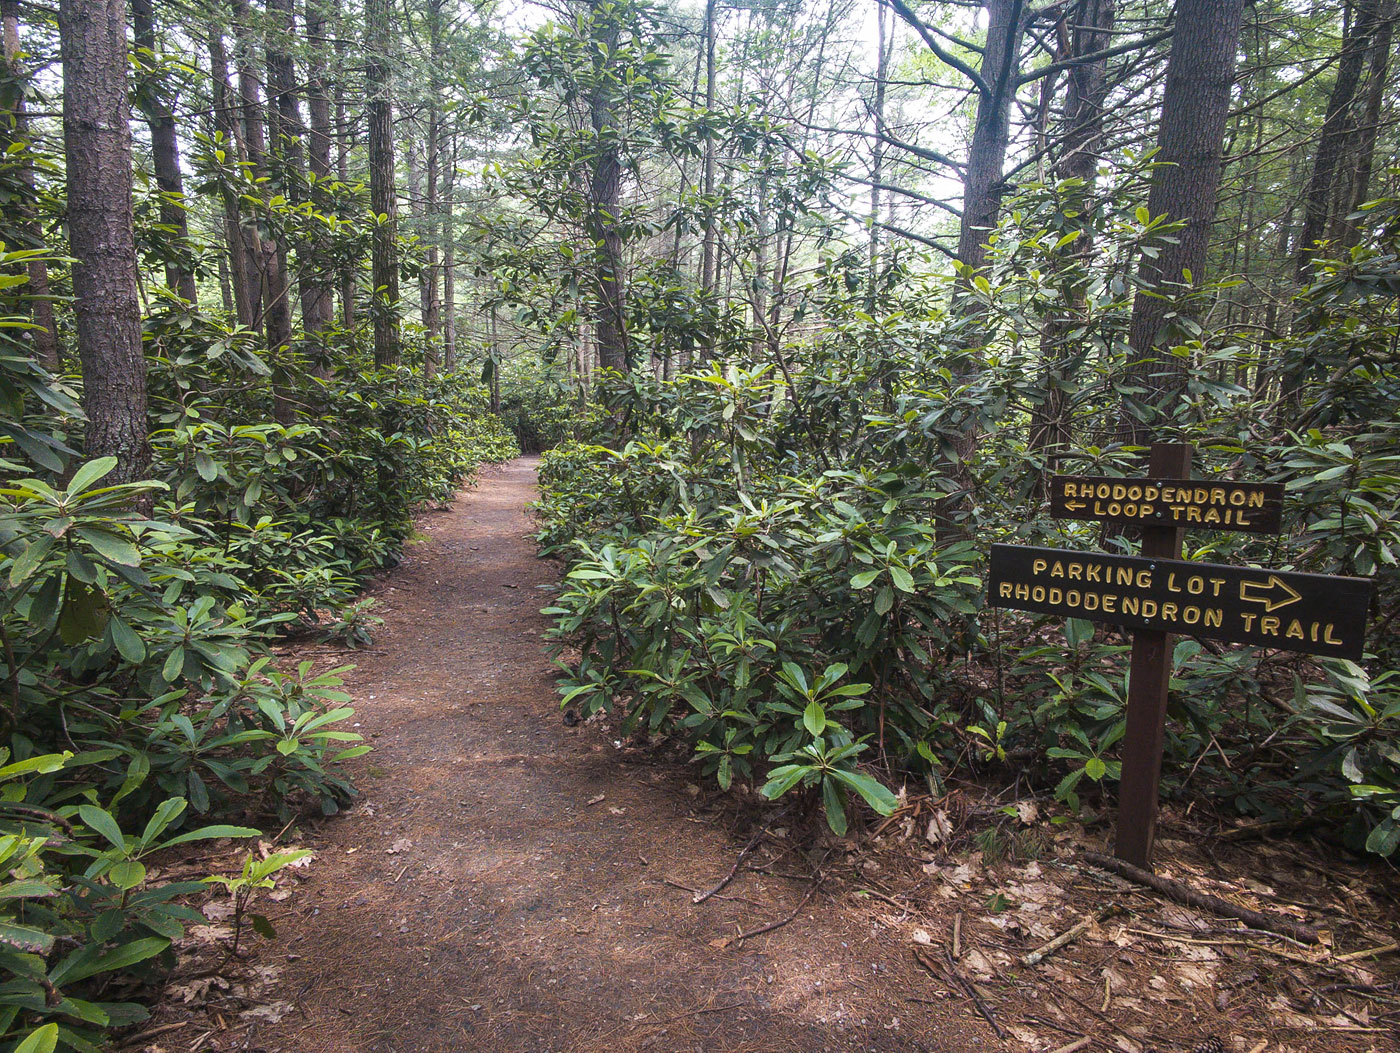 Hike Little Monadnock Mountain in Rhododendron State Park, New Hampshire - Stav is Lost